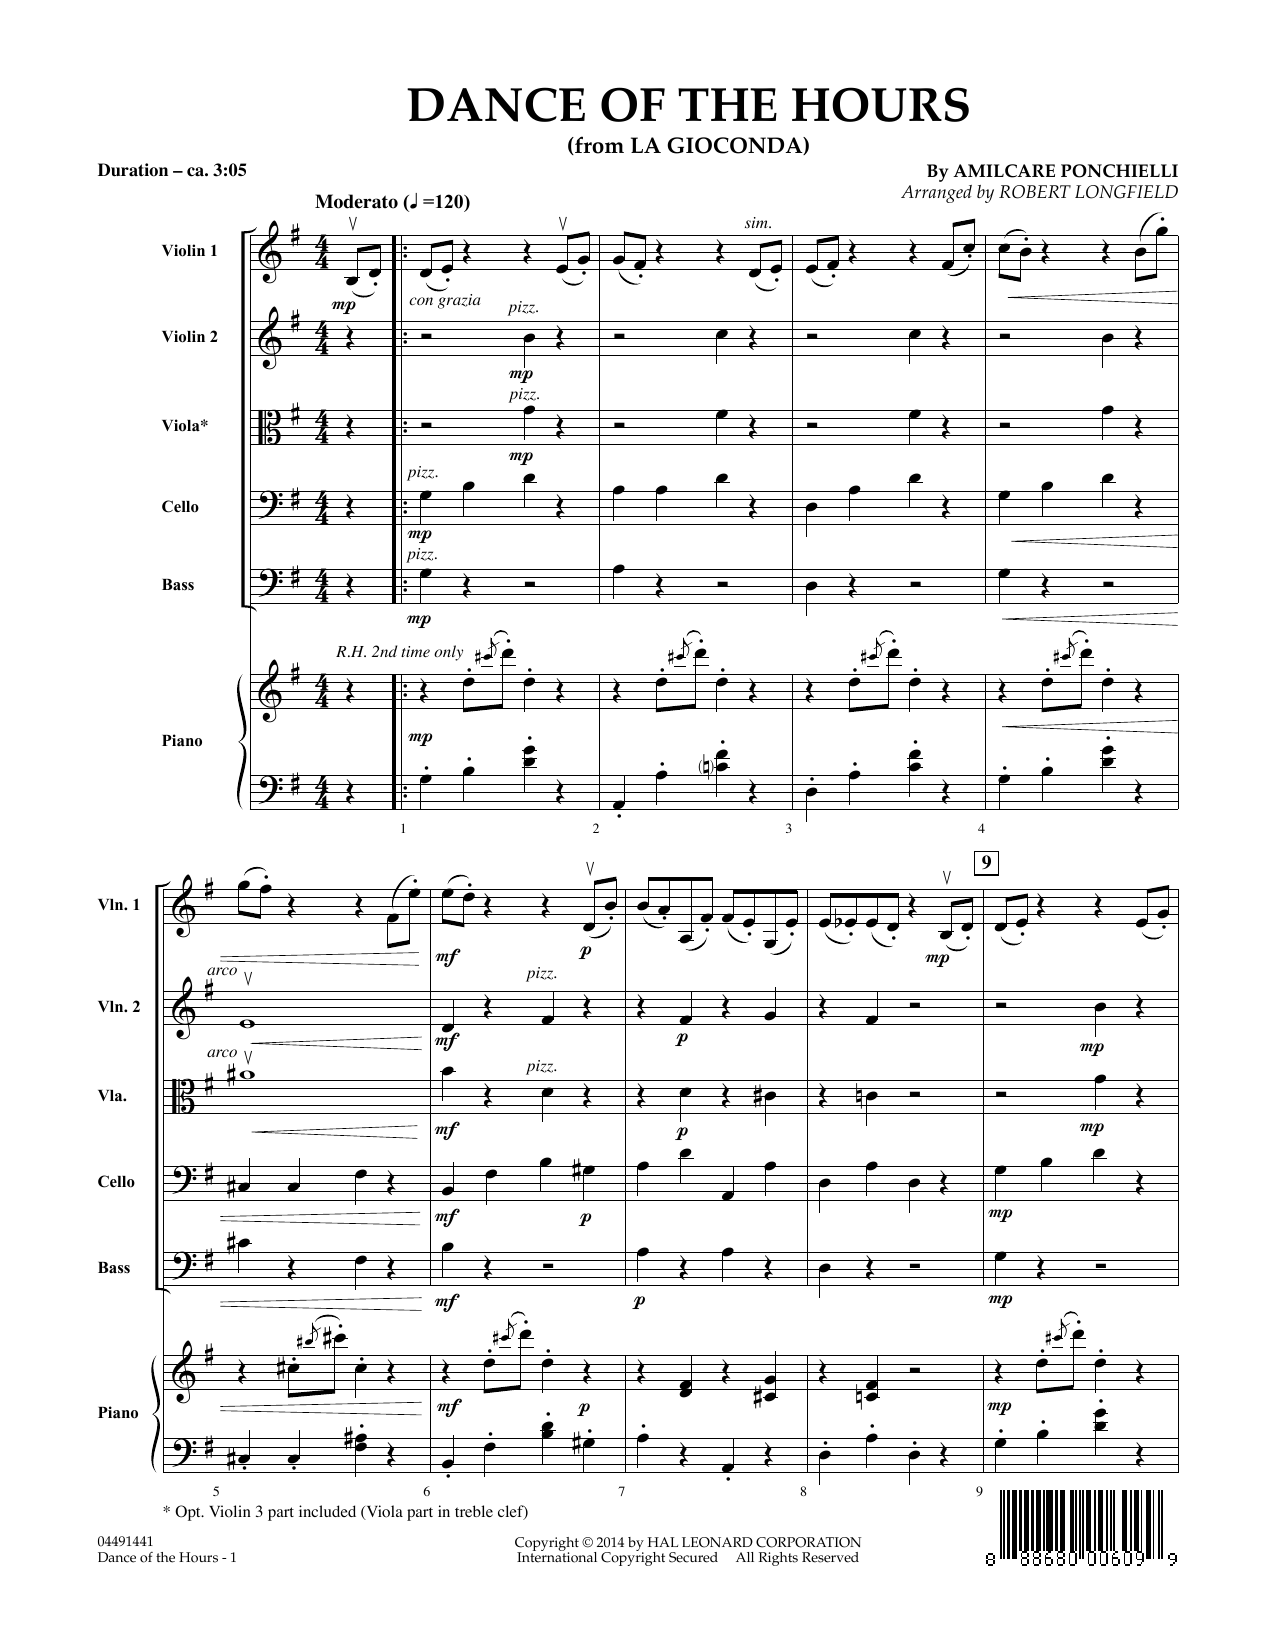 Download Amilcare Ponchielli Dance of the Hours (arr. Robert Longfield) - Conductor Score (Full Score) sheet music and printable PDF score & Classical music notes